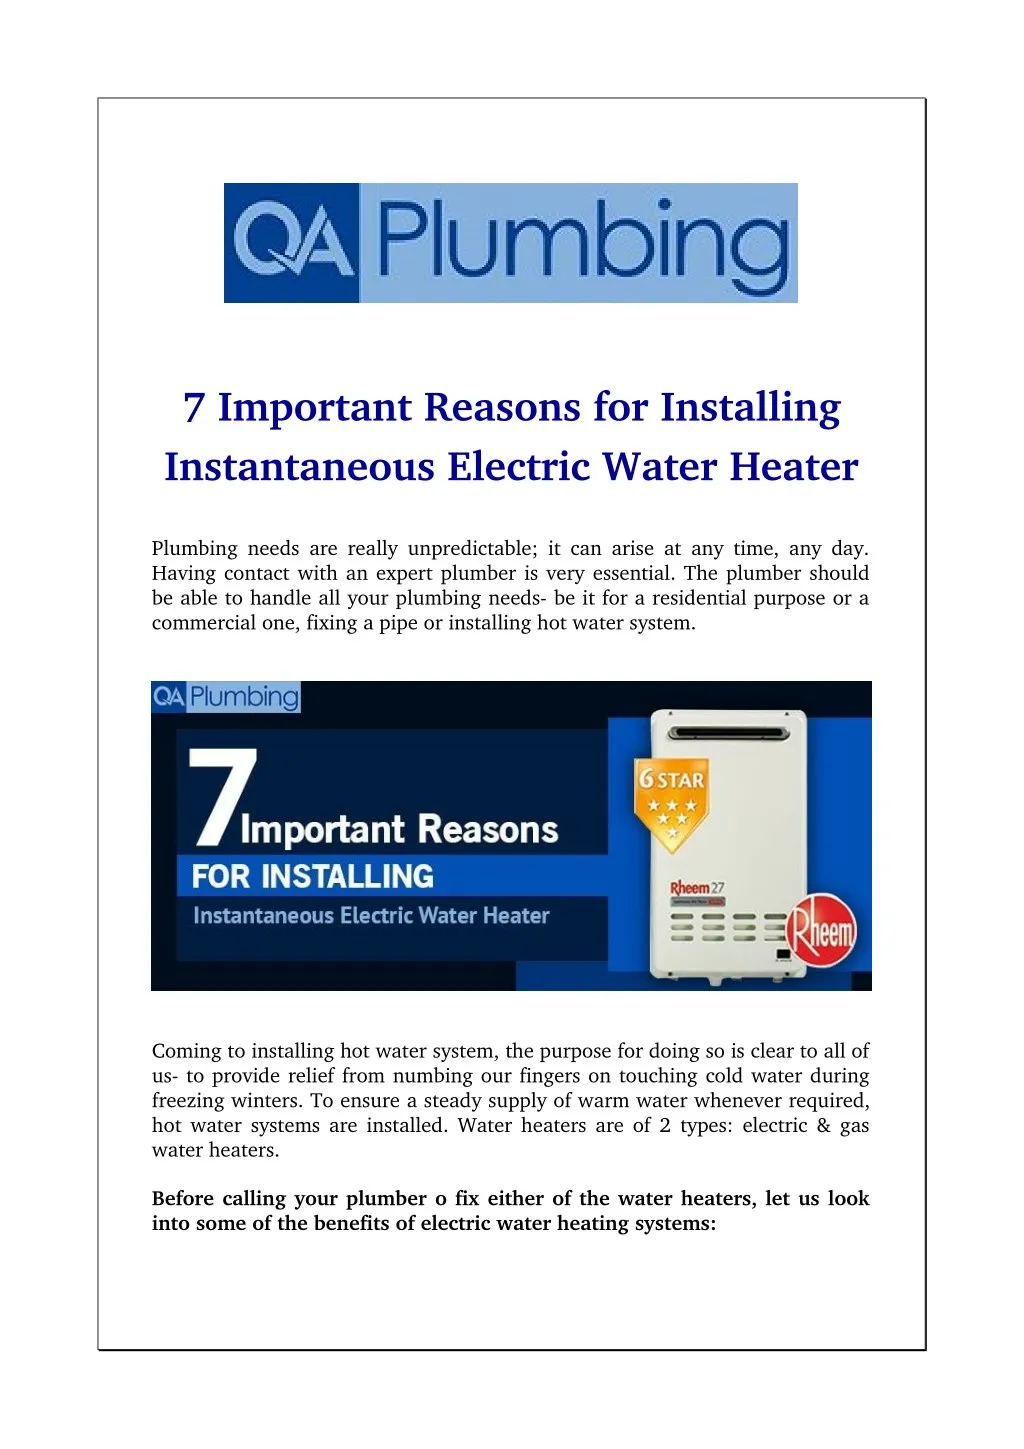 7 important reasons for installing instantaneous